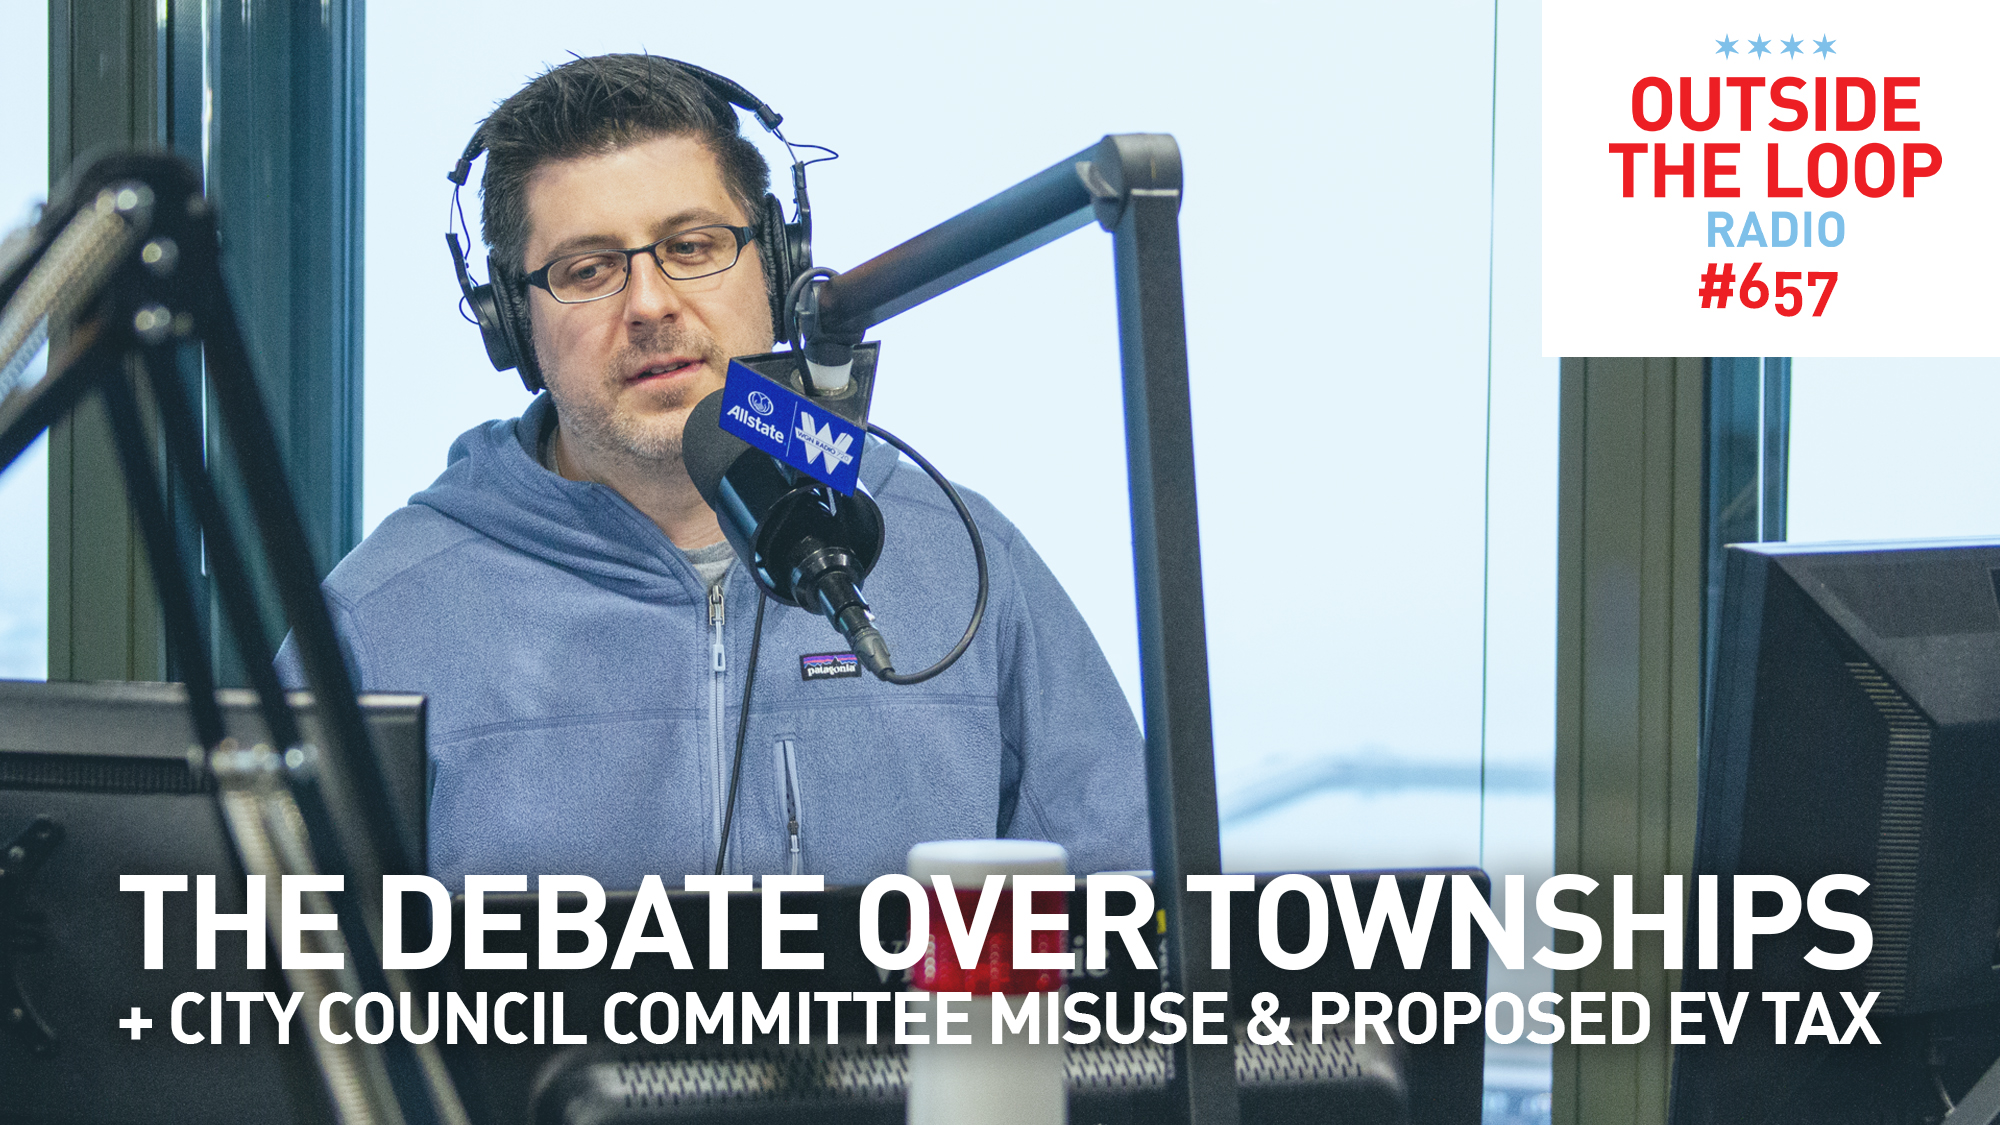 Mike Stephen discusses the possibility of eliminating townships in Illinois.